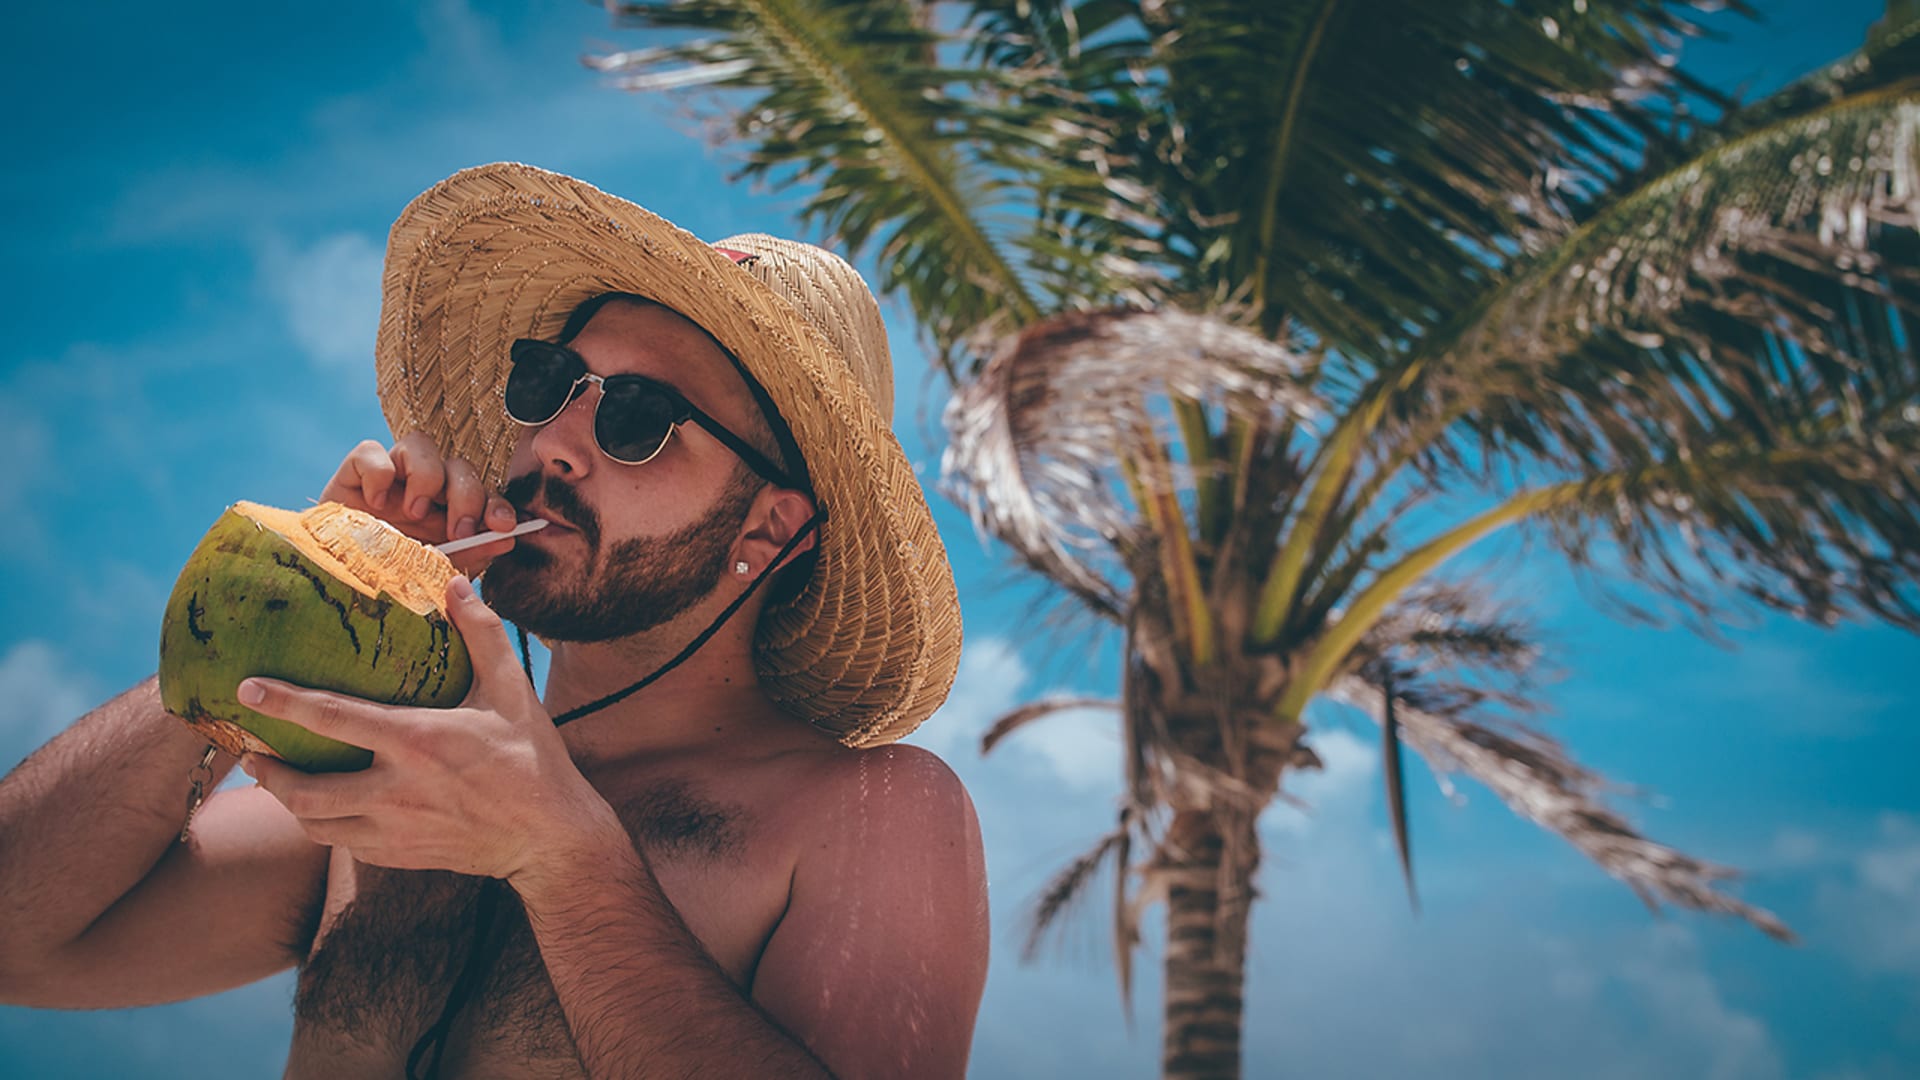 Tainted alcohol isn’t just a Costa Rica problem—here’s what tourists need to know